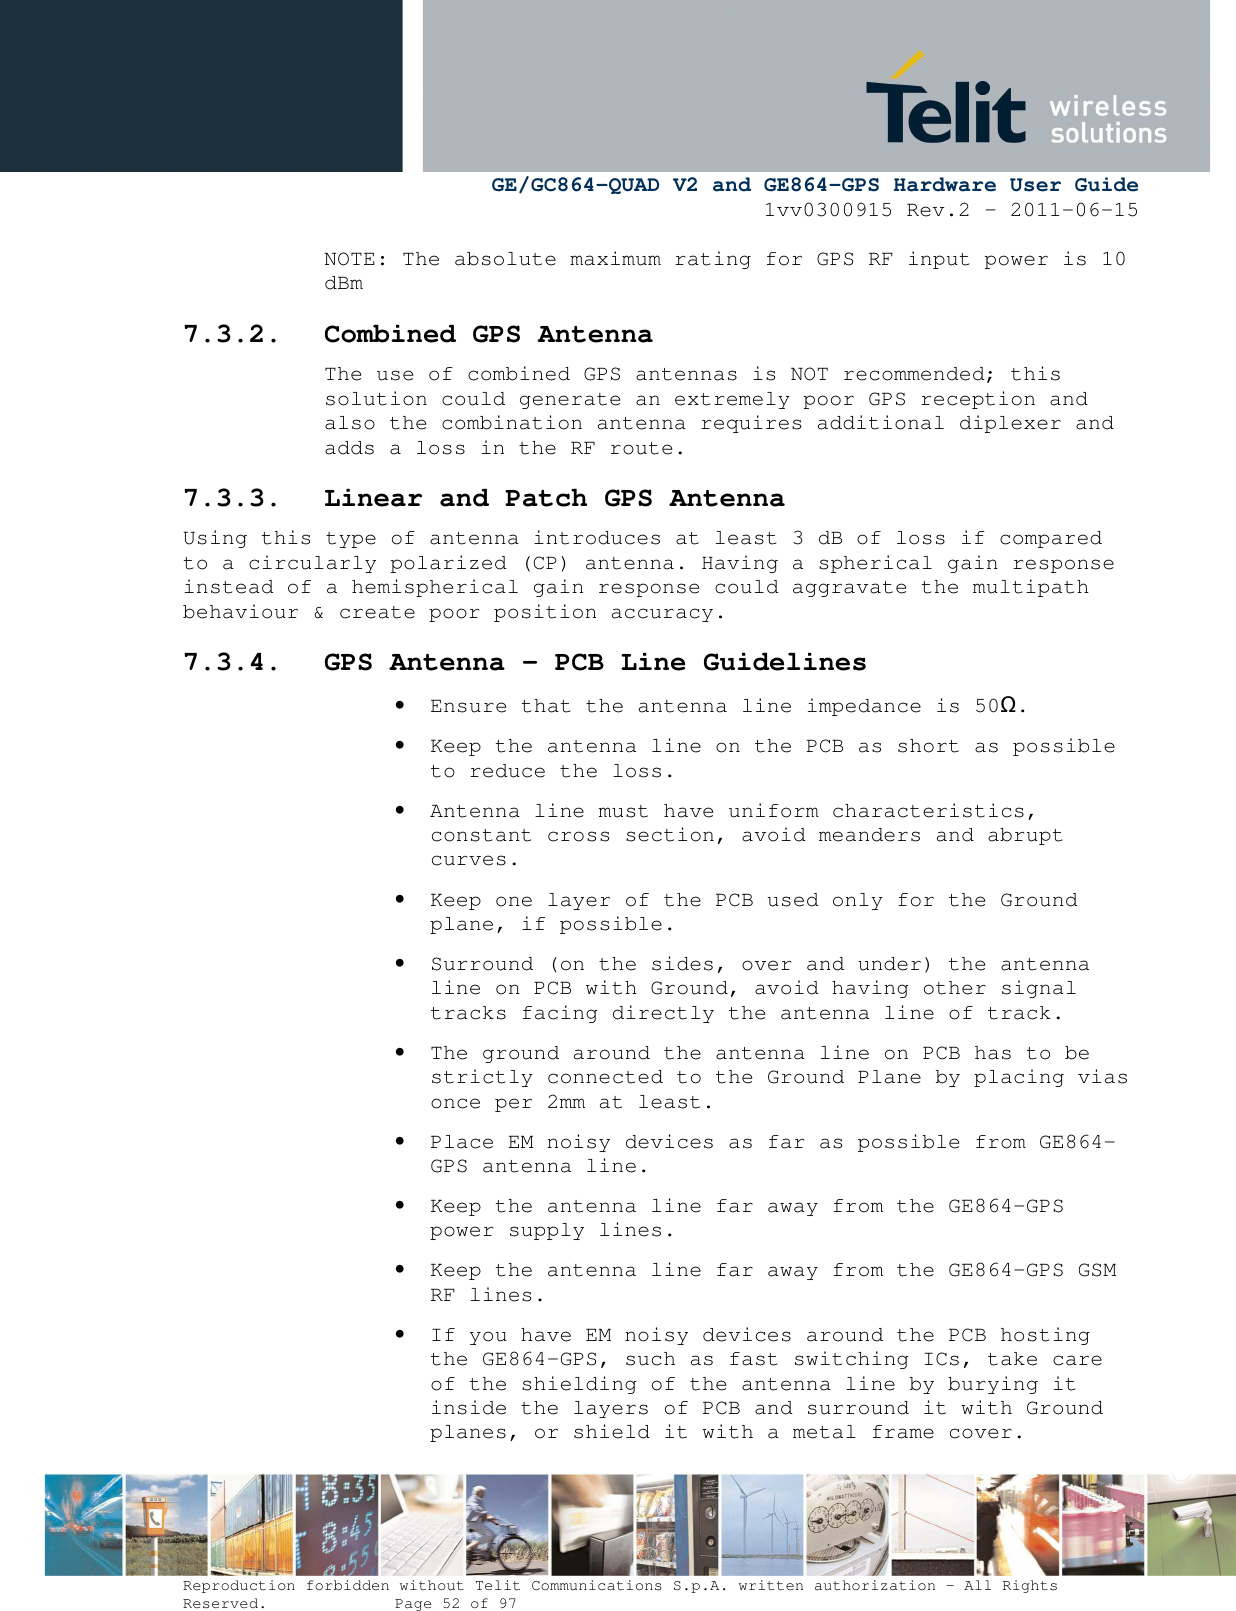      GE/GC864-QUAD V2 and GE864-GPS Hardware User Guide 1vv0300915 Rev.2 – 2011-06-15  Reproduction forbidden without Telit Communications S.p.A. written authorization - All Rights Reserved.    Page 52 of 97  NOTE: The absolute maximum rating for GPS RF input power is 10 dBm 7.3.2. Combined GPS Antenna The use of combined GPS antennas is NOT recommended; this solution could generate an extremely poor GPS reception and also the combination antenna requires additional diplexer and adds a loss in the RF route. 7.3.3. Linear and Patch GPS Antenna Using this type of antenna introduces at least 3 dB of loss if compared to a circularly polarized (CP) antenna. Having a spherical gain response instead of a hemispherical gain response could aggravate the multipath behaviour &amp; create poor position accuracy. 7.3.4. GPS Antenna - PCB Line Guidelines • Ensure that the antenna line impedance is 50Ω. • Keep the antenna line on the PCB as short as possible to reduce the loss. • Antenna line must have uniform characteristics, constant cross section, avoid meanders and abrupt curves. • Keep one layer of the PCB used only for the Ground plane, if possible. • Surround (on the sides, over and under) the antenna line on PCB with Ground, avoid having other signal tracks facing directly the antenna line of track. • The ground around the antenna line on PCB has to be strictly connected to the Ground Plane by placing vias once per 2mm at least. • Place EM noisy devices as far as possible from GE864-GPS antenna line. • Keep the antenna line far away from the GE864-GPS power supply lines. • Keep the antenna line far away from the GE864-GPS GSM RF lines. • If you have EM noisy devices around the PCB hosting the GE864-GPS, such as fast switching ICs, take care of the shielding of the antenna line by burying it inside the layers of PCB and surround it with Ground planes, or shield it with a metal frame cover. 